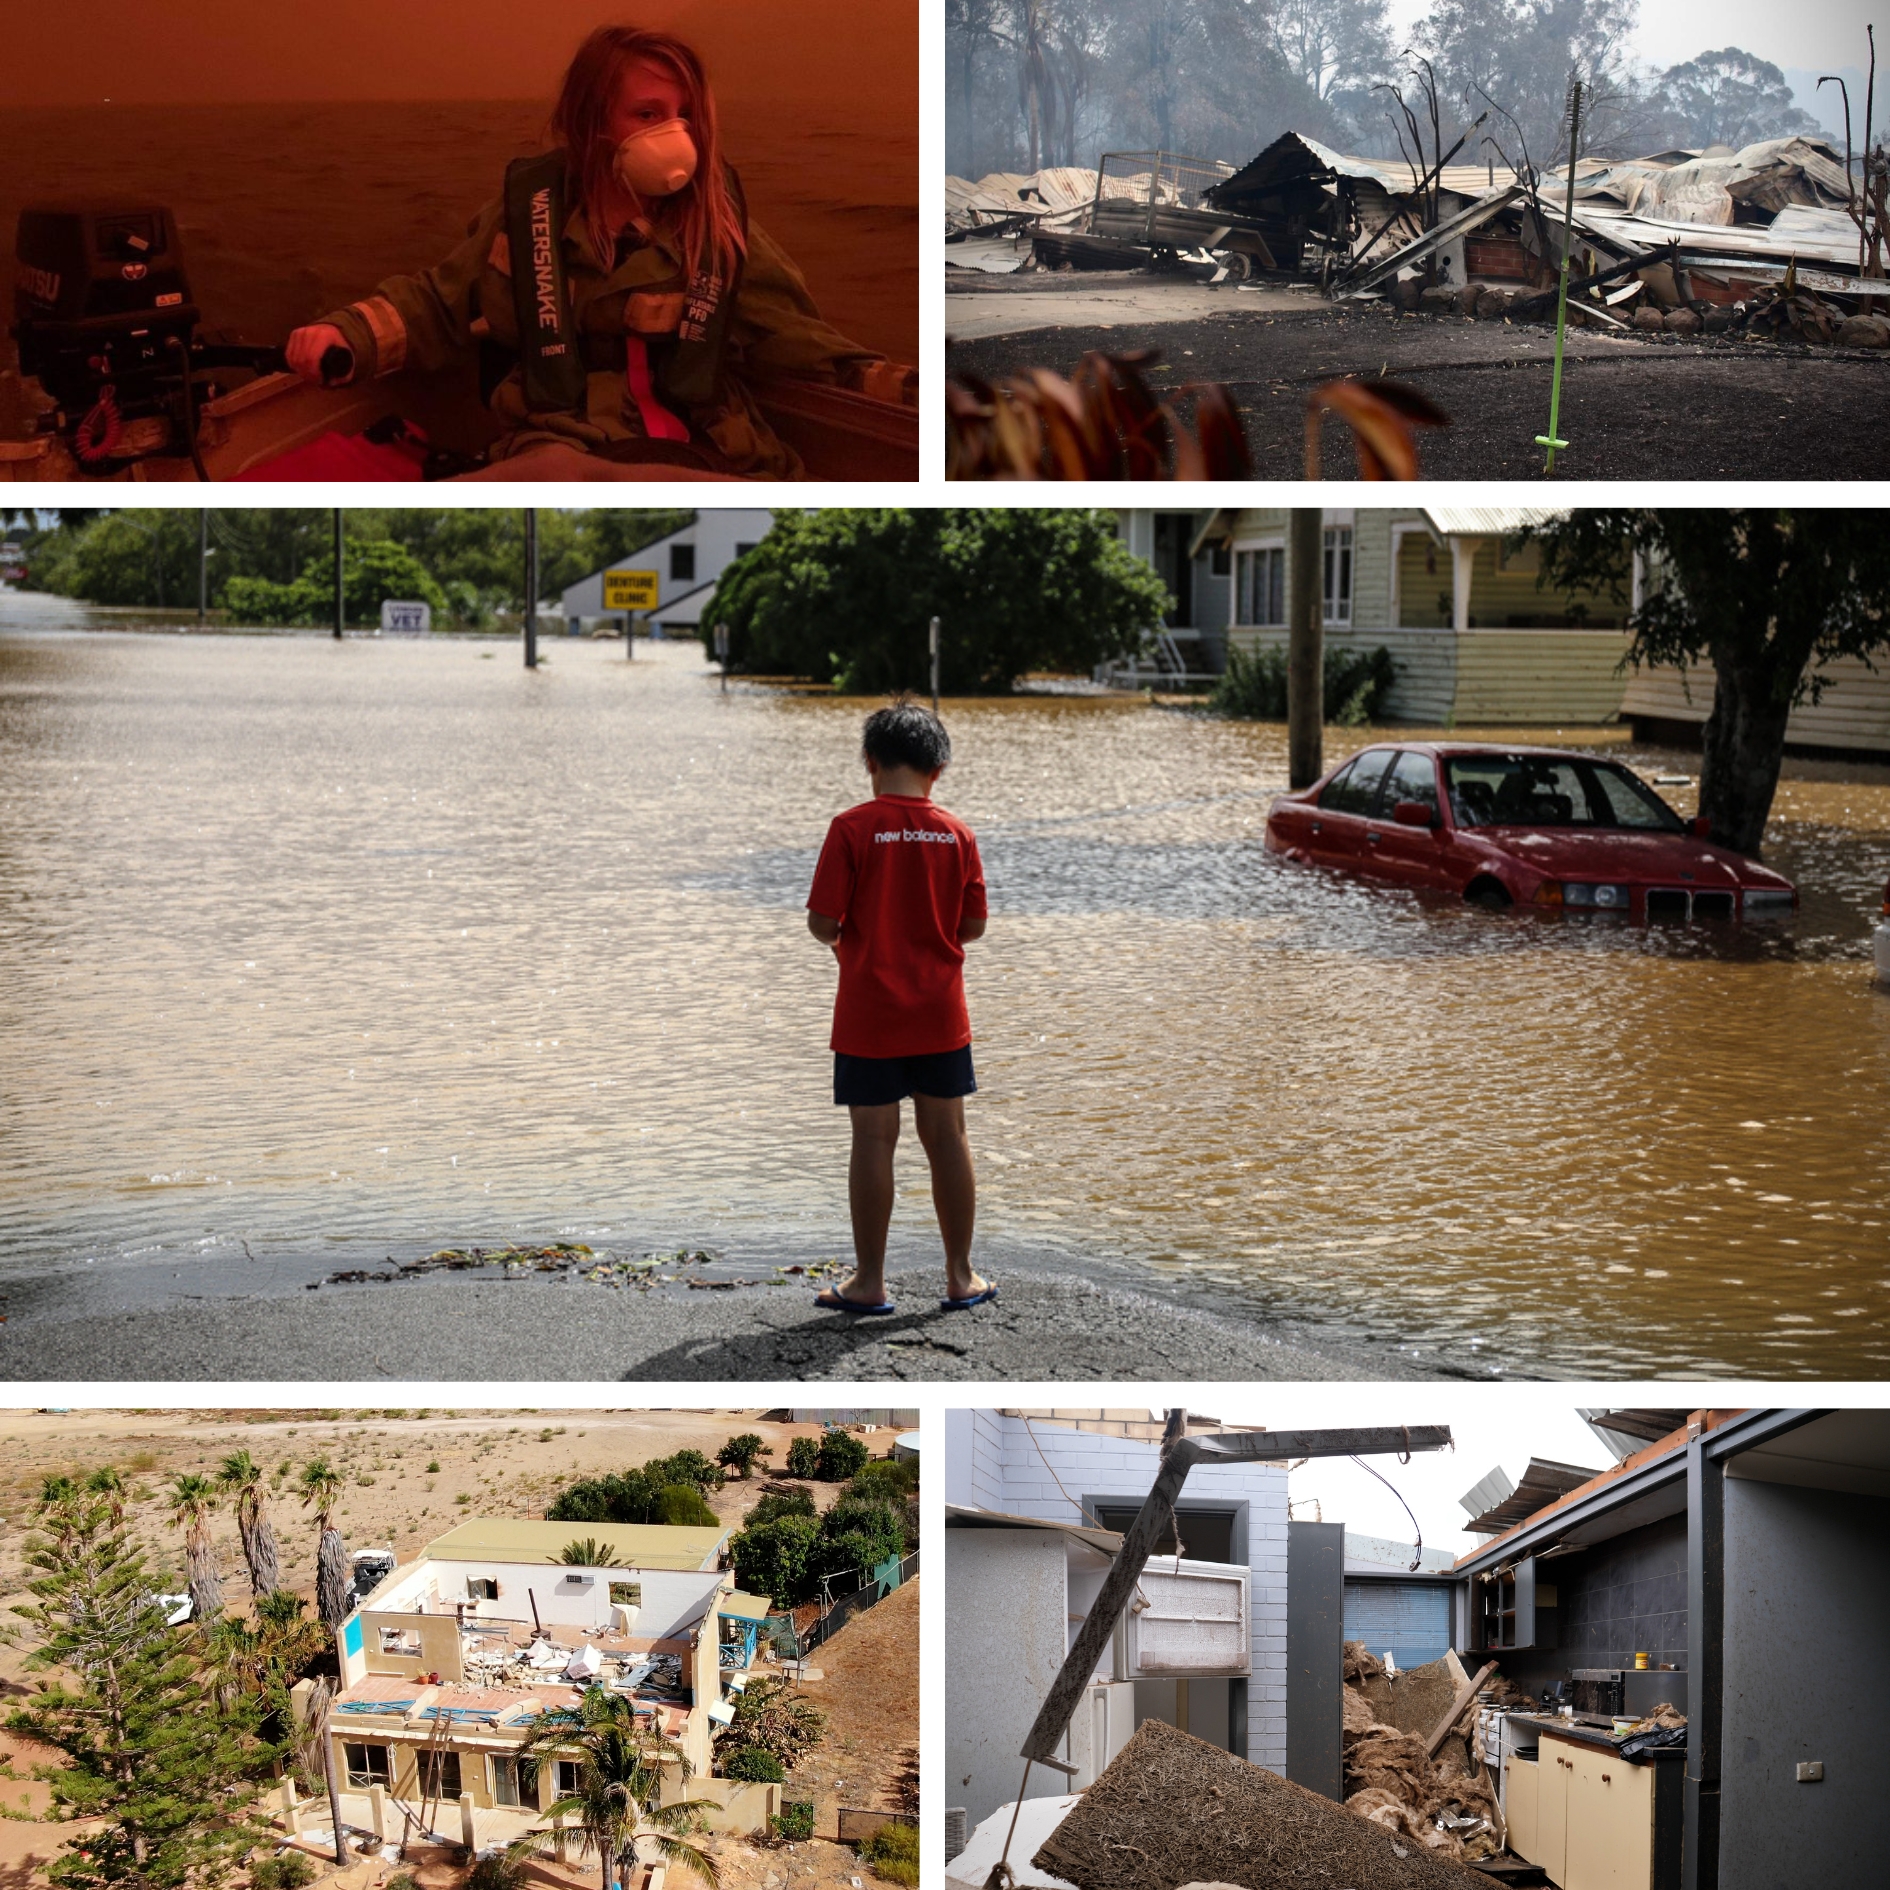 Images from the black summer bushfires, the Lismore floods and Cyclone Seroja in Kalbarri